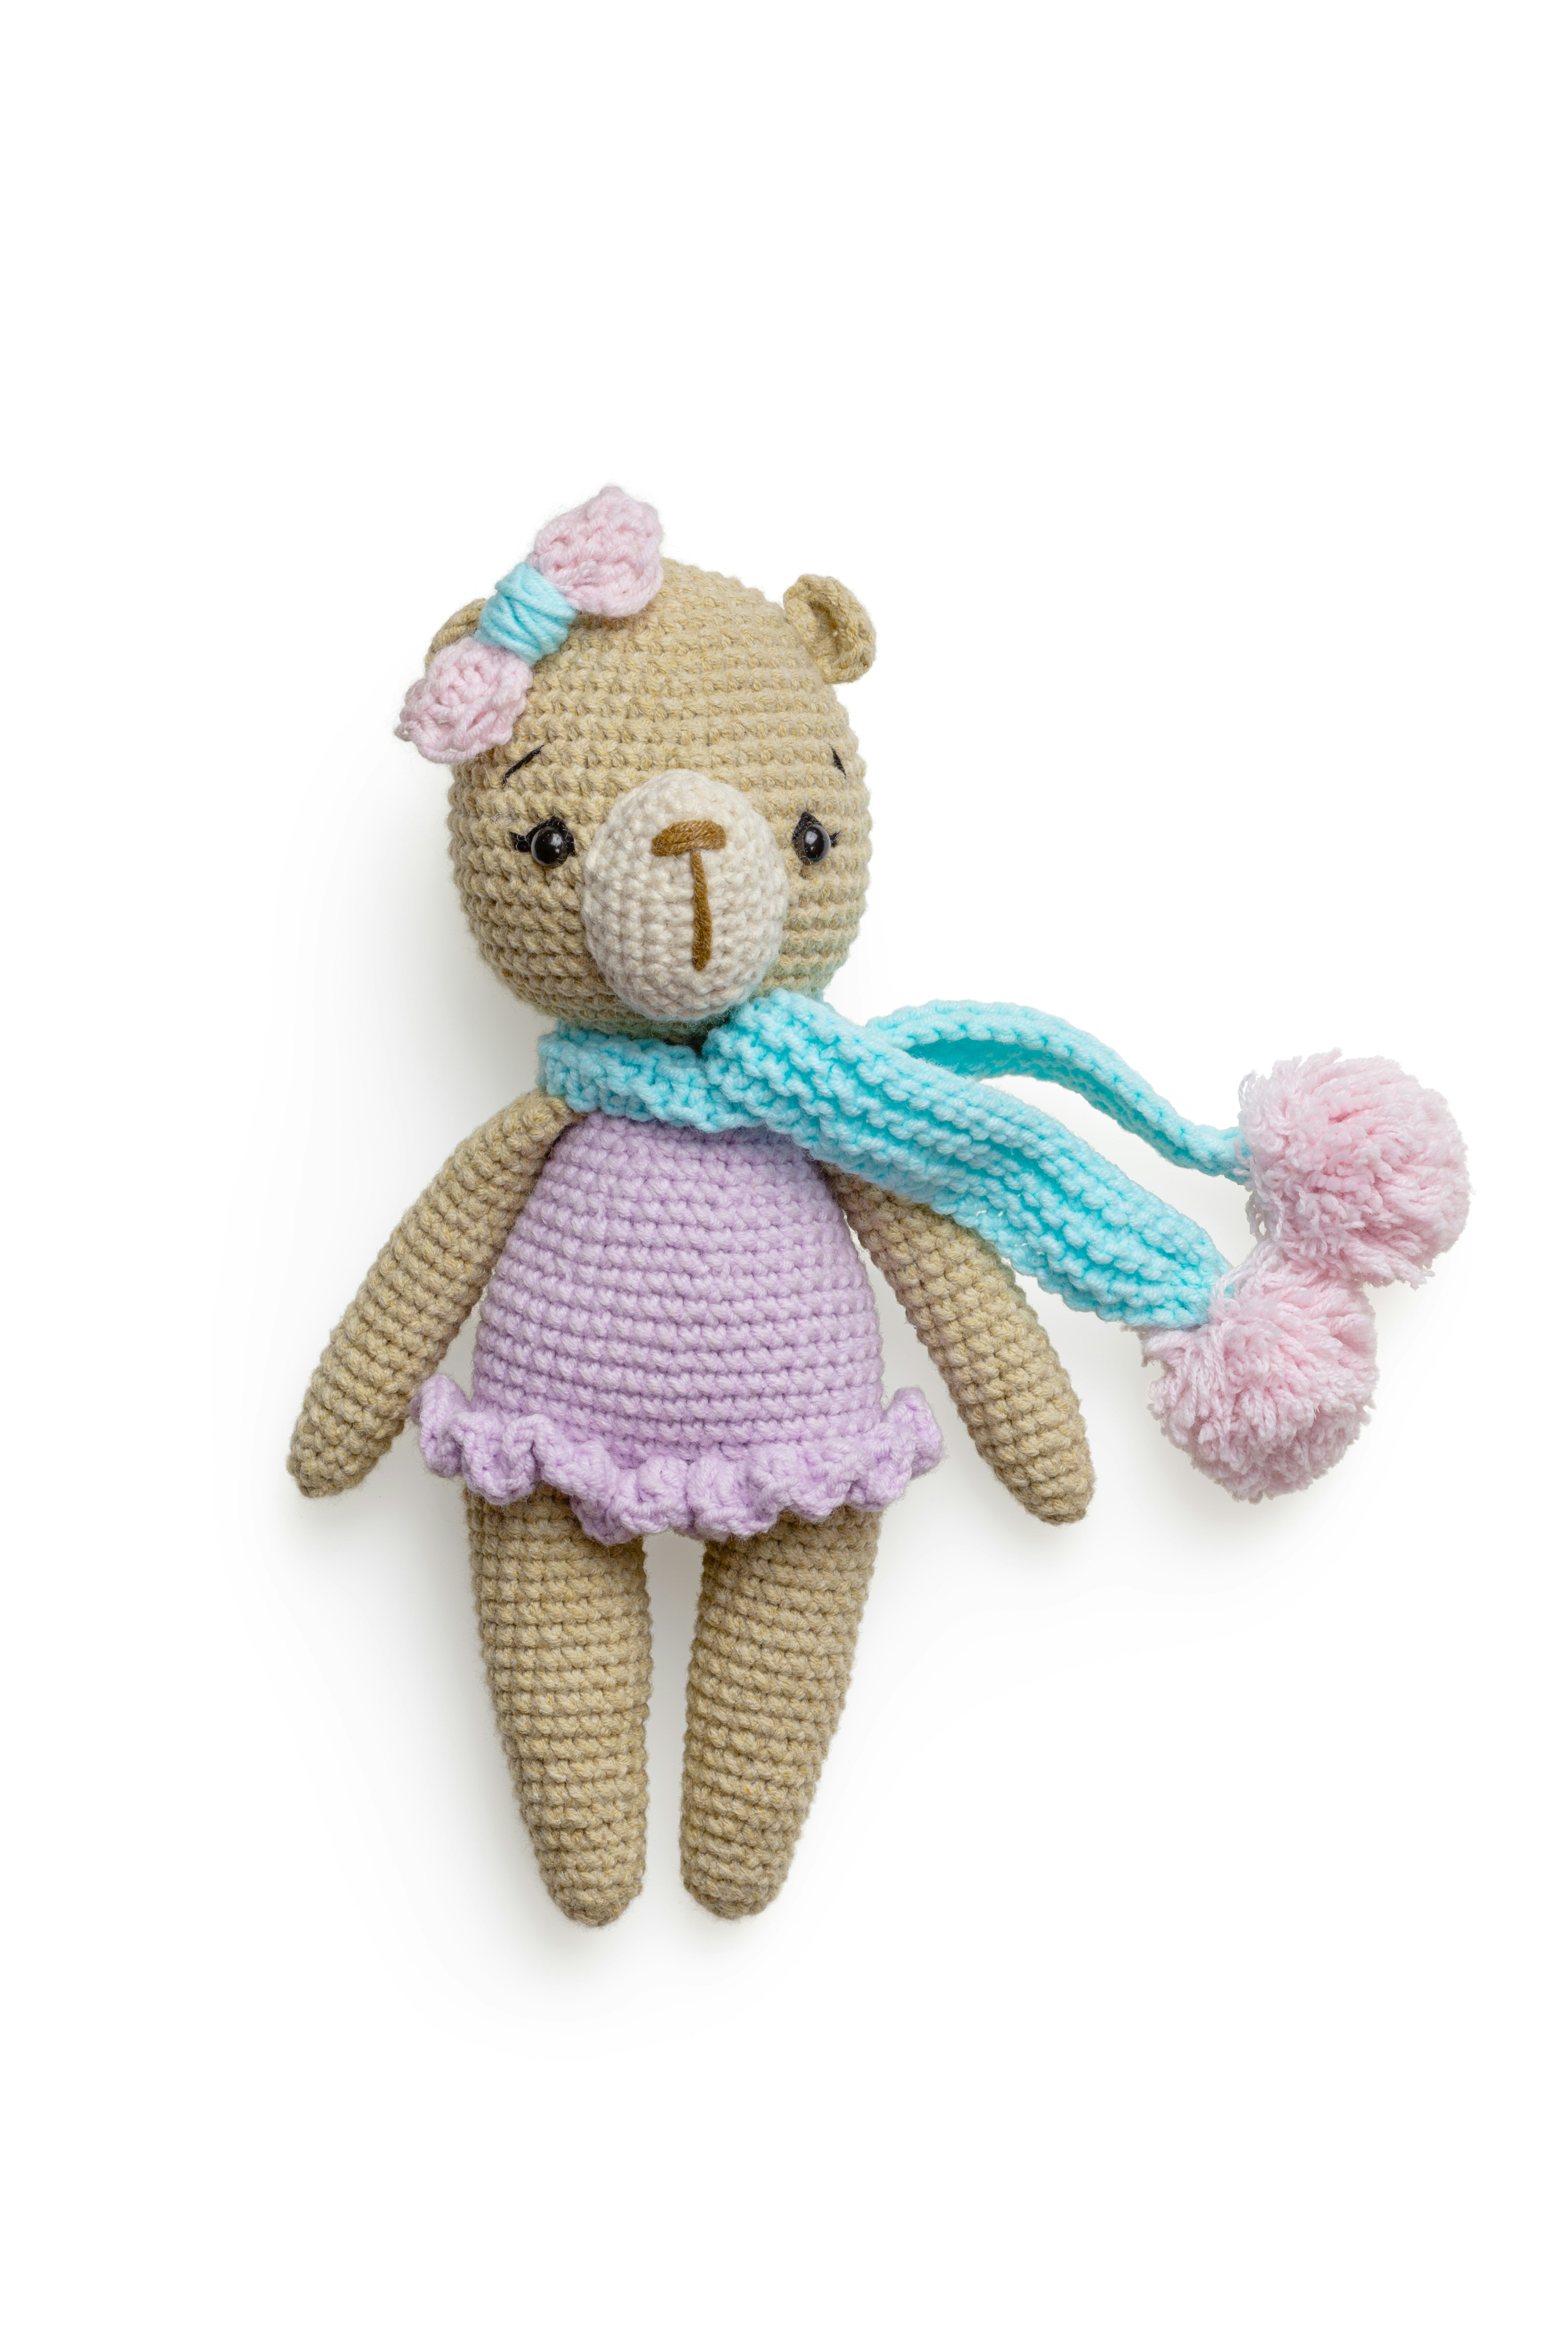 a knitted teddy bear wearing a scarf